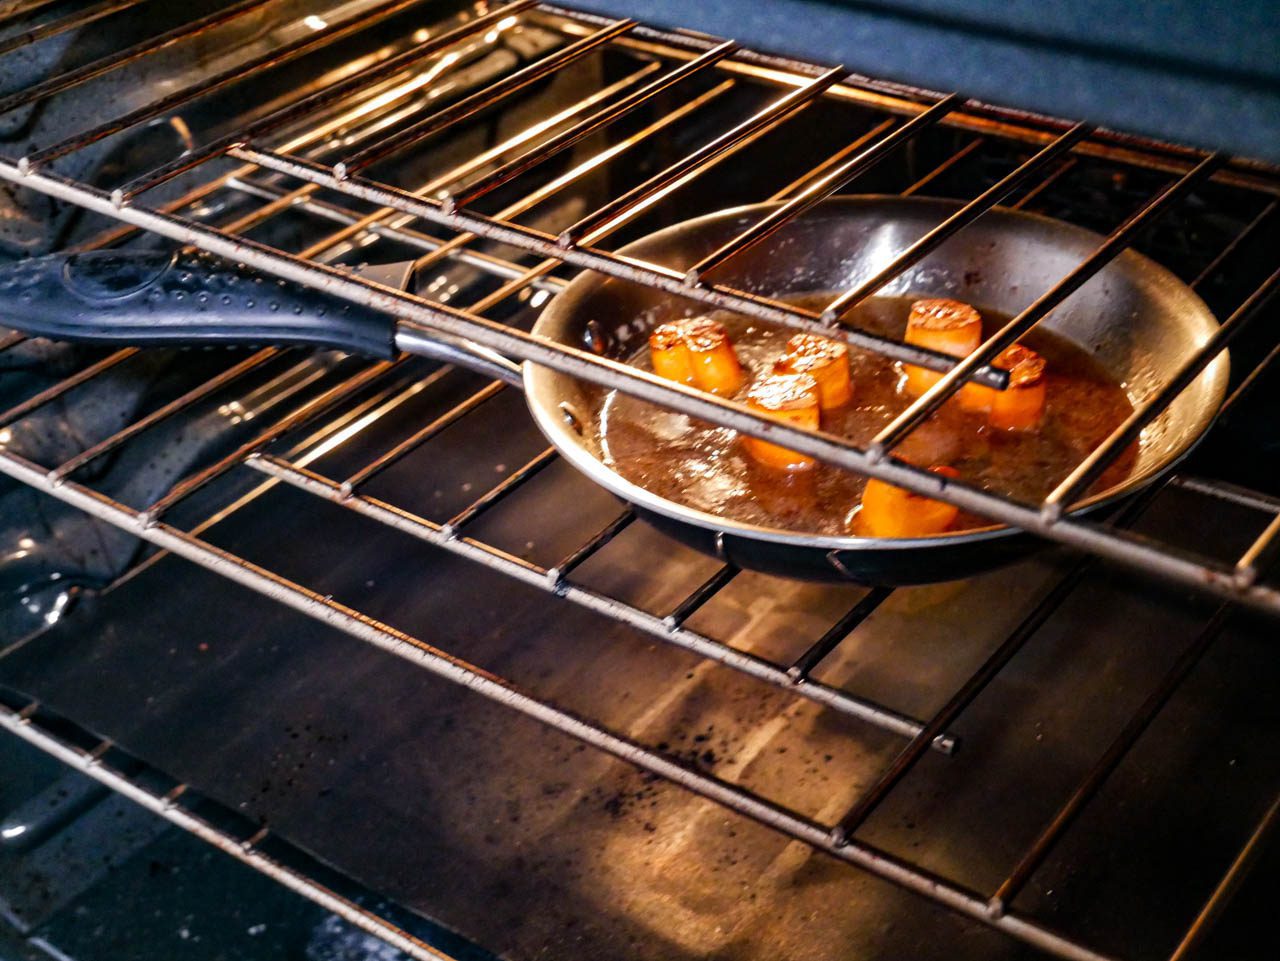 Sweet potato fondants in a frying pan that is placed in an oven to cook further